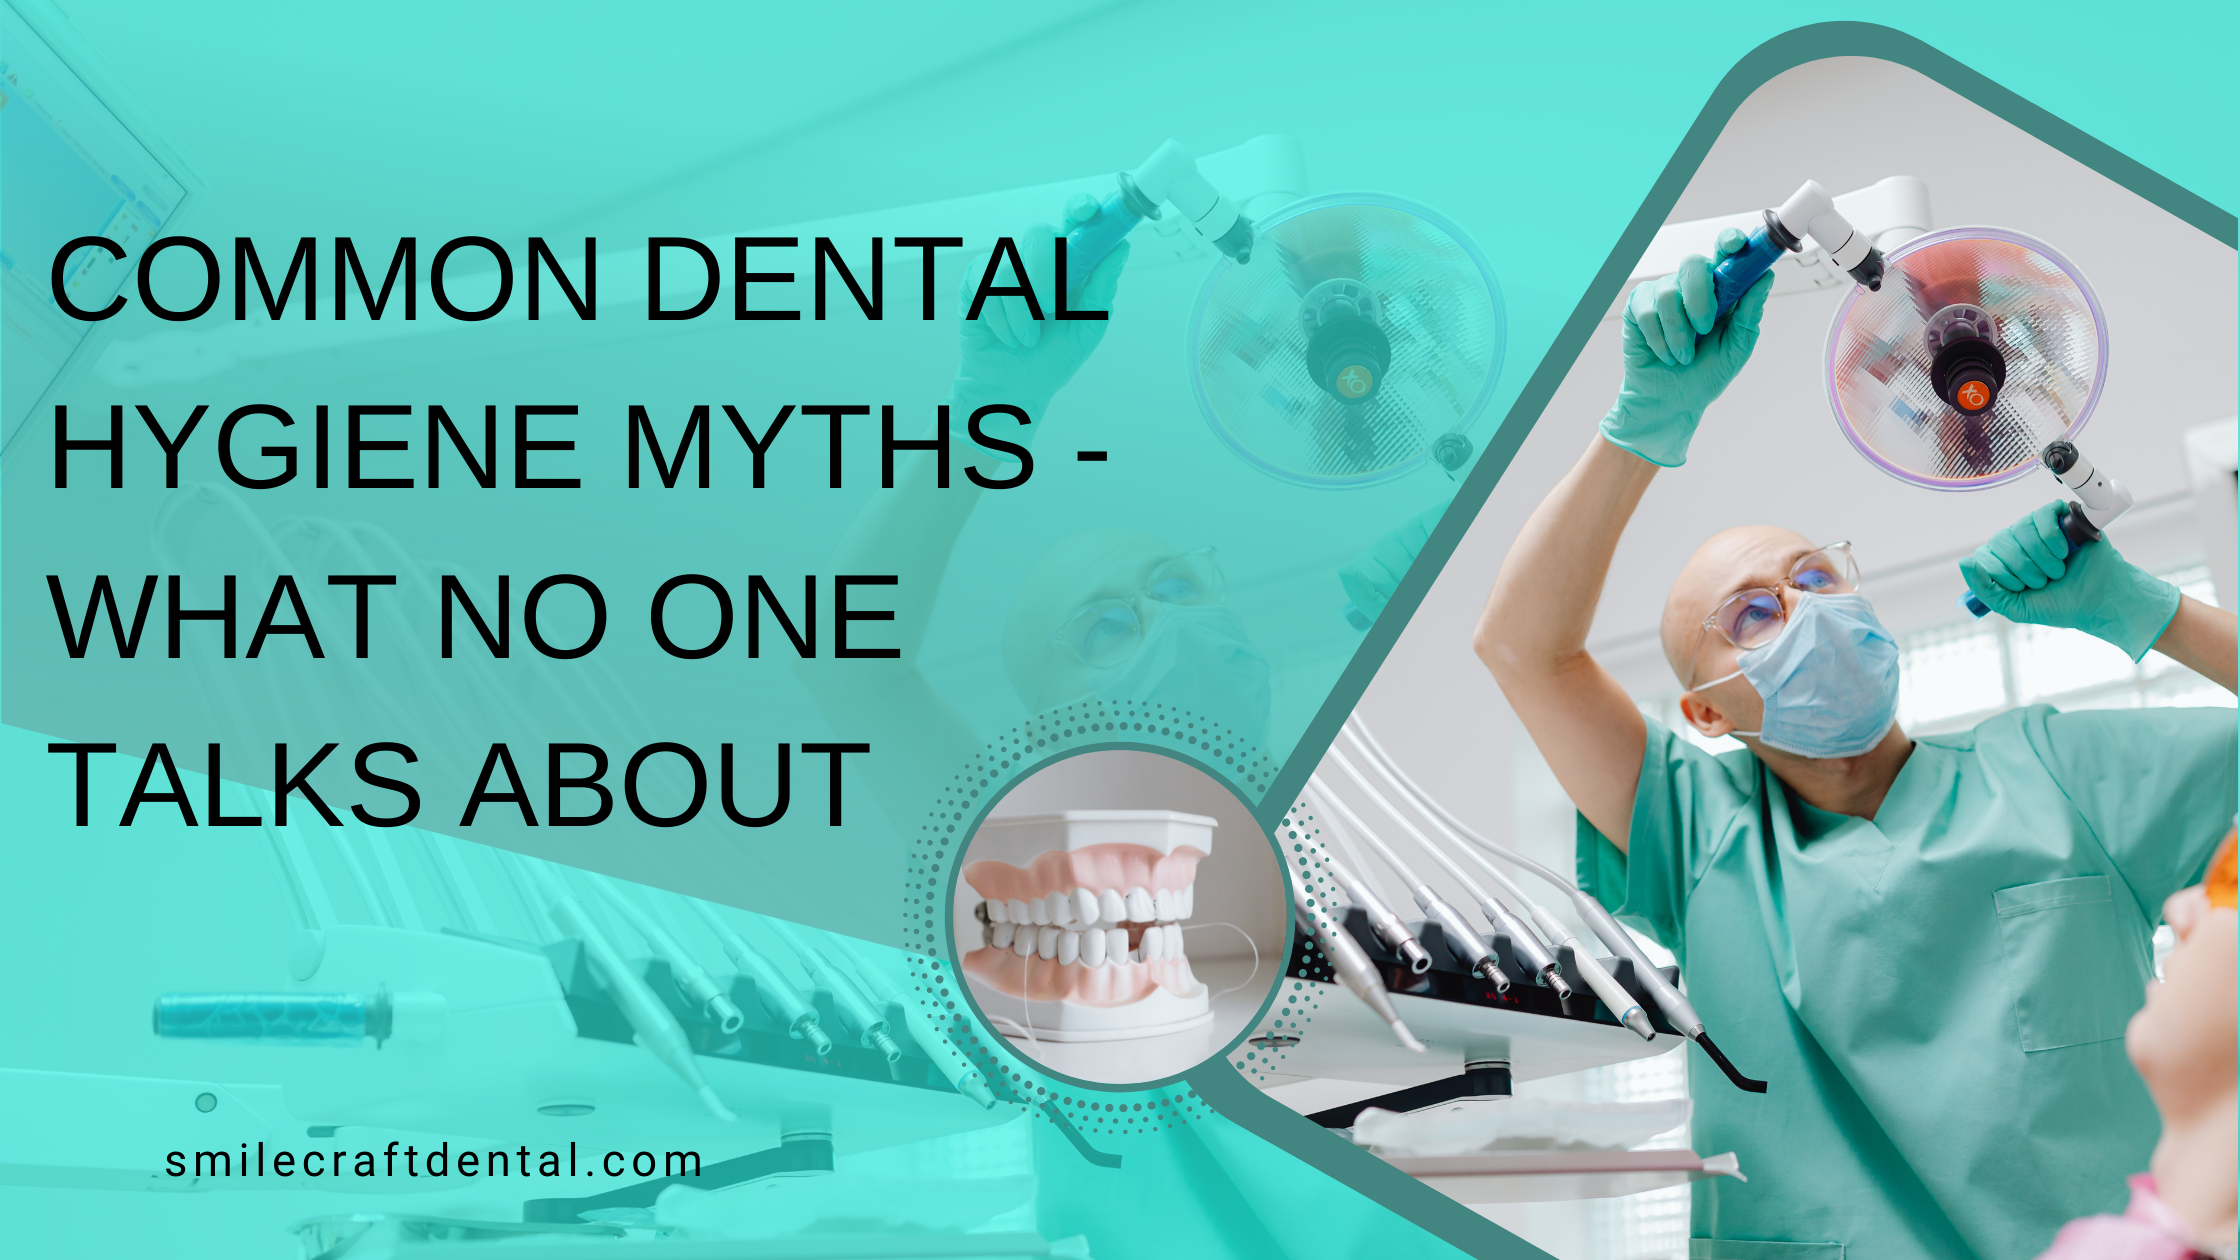 Common Dental Hygiene Myths - What No One Talks About